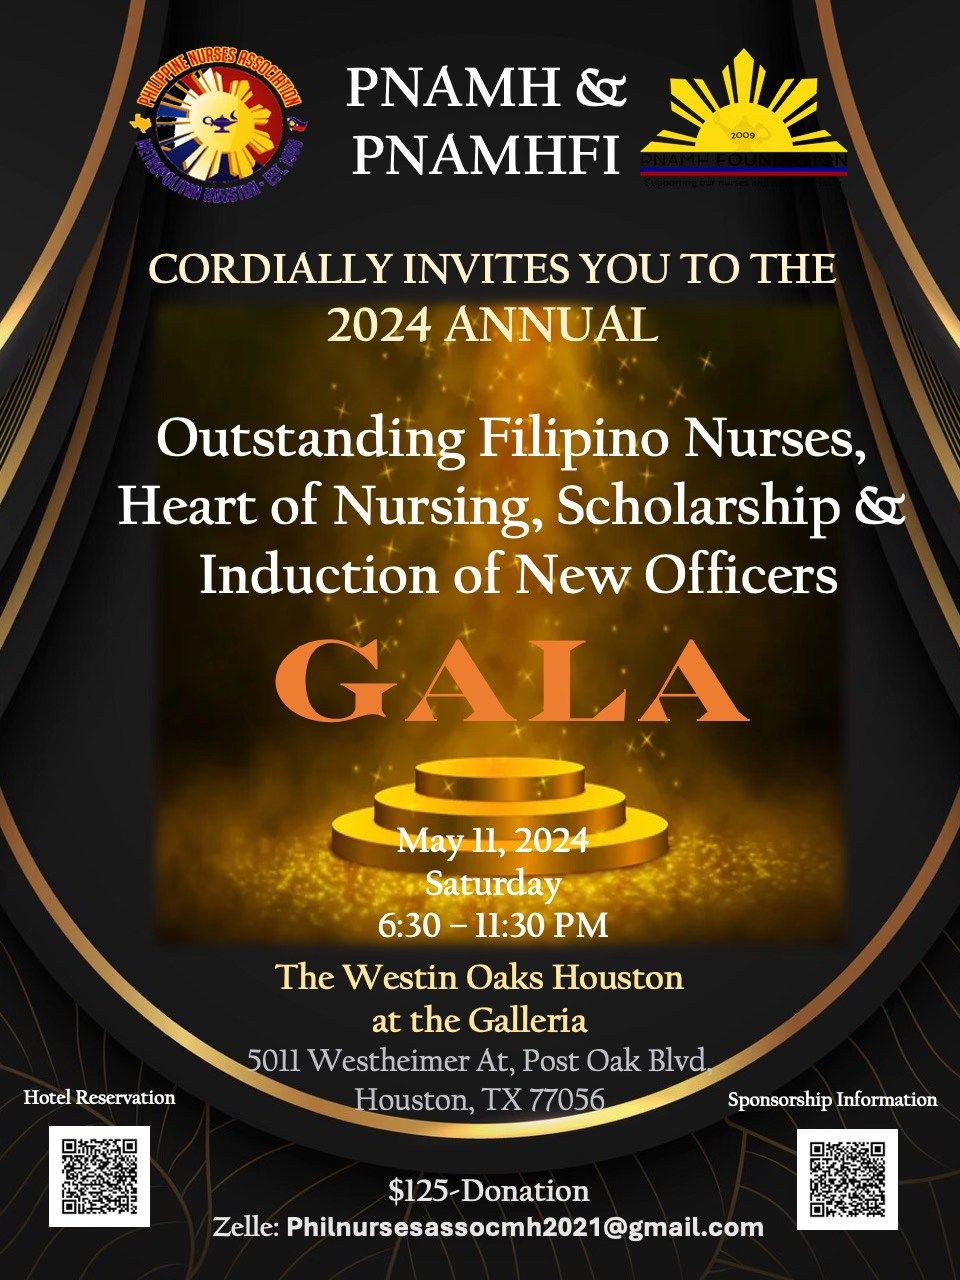 Annual OFN & Induction of Officers